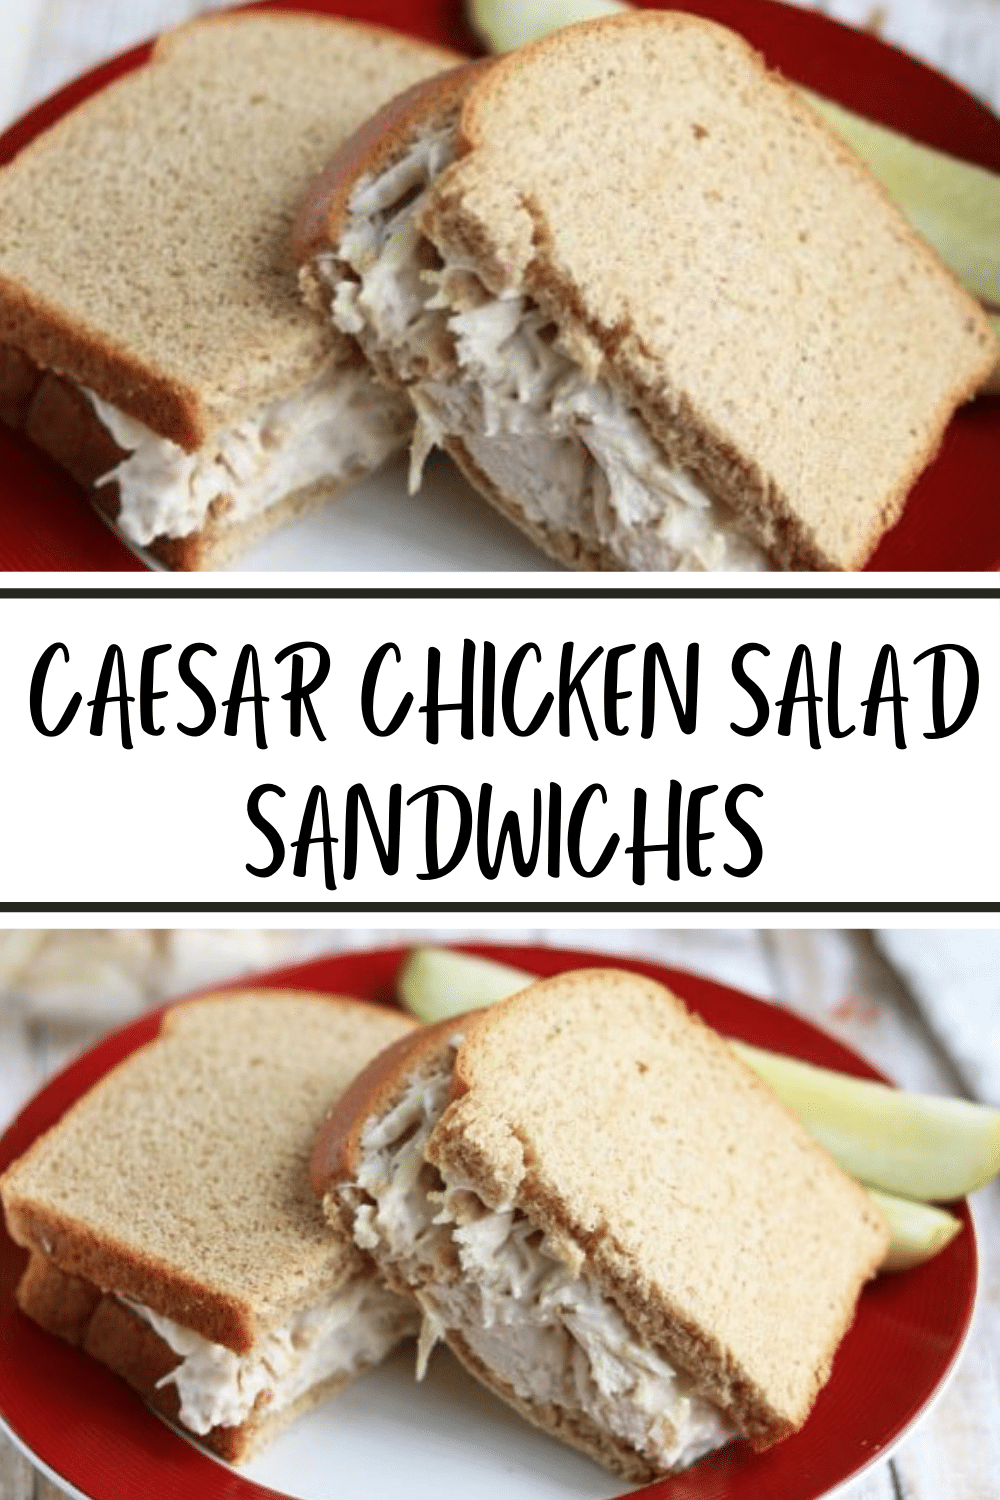 These caesar chicken salad sandwiches are so delicious and super easy to make. They're my favorite meal when I have to pack a lunch! #chickensalad #sandwichrecipe #easylunch via @wondermomwannab